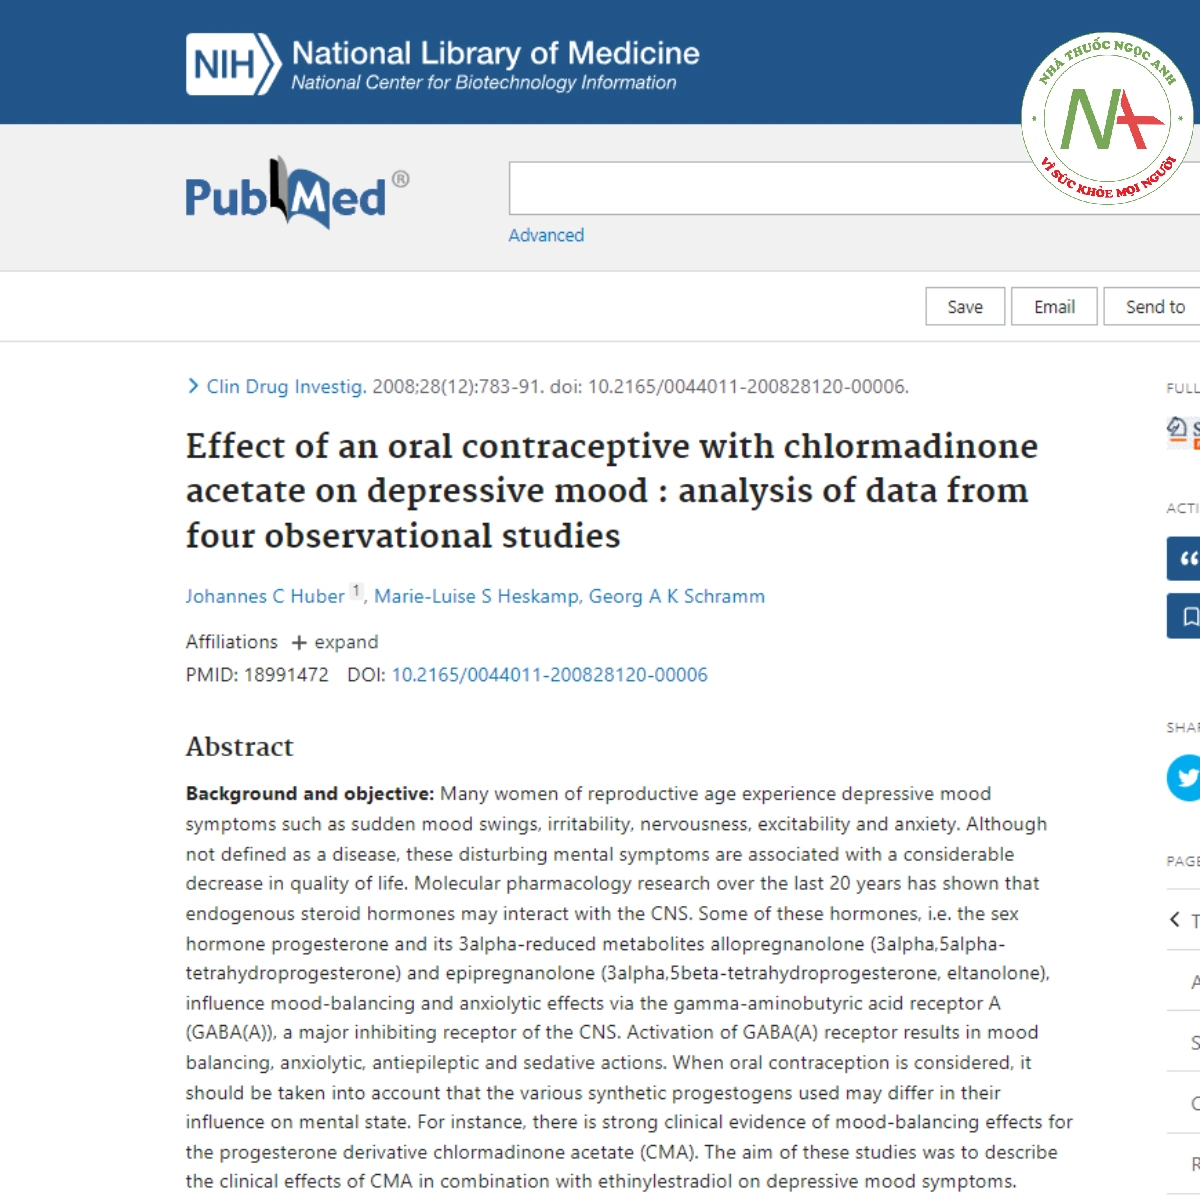 Effect of an oral contraceptive with chlormadinone acetate on depressive mood : analysis of data from four observational studies